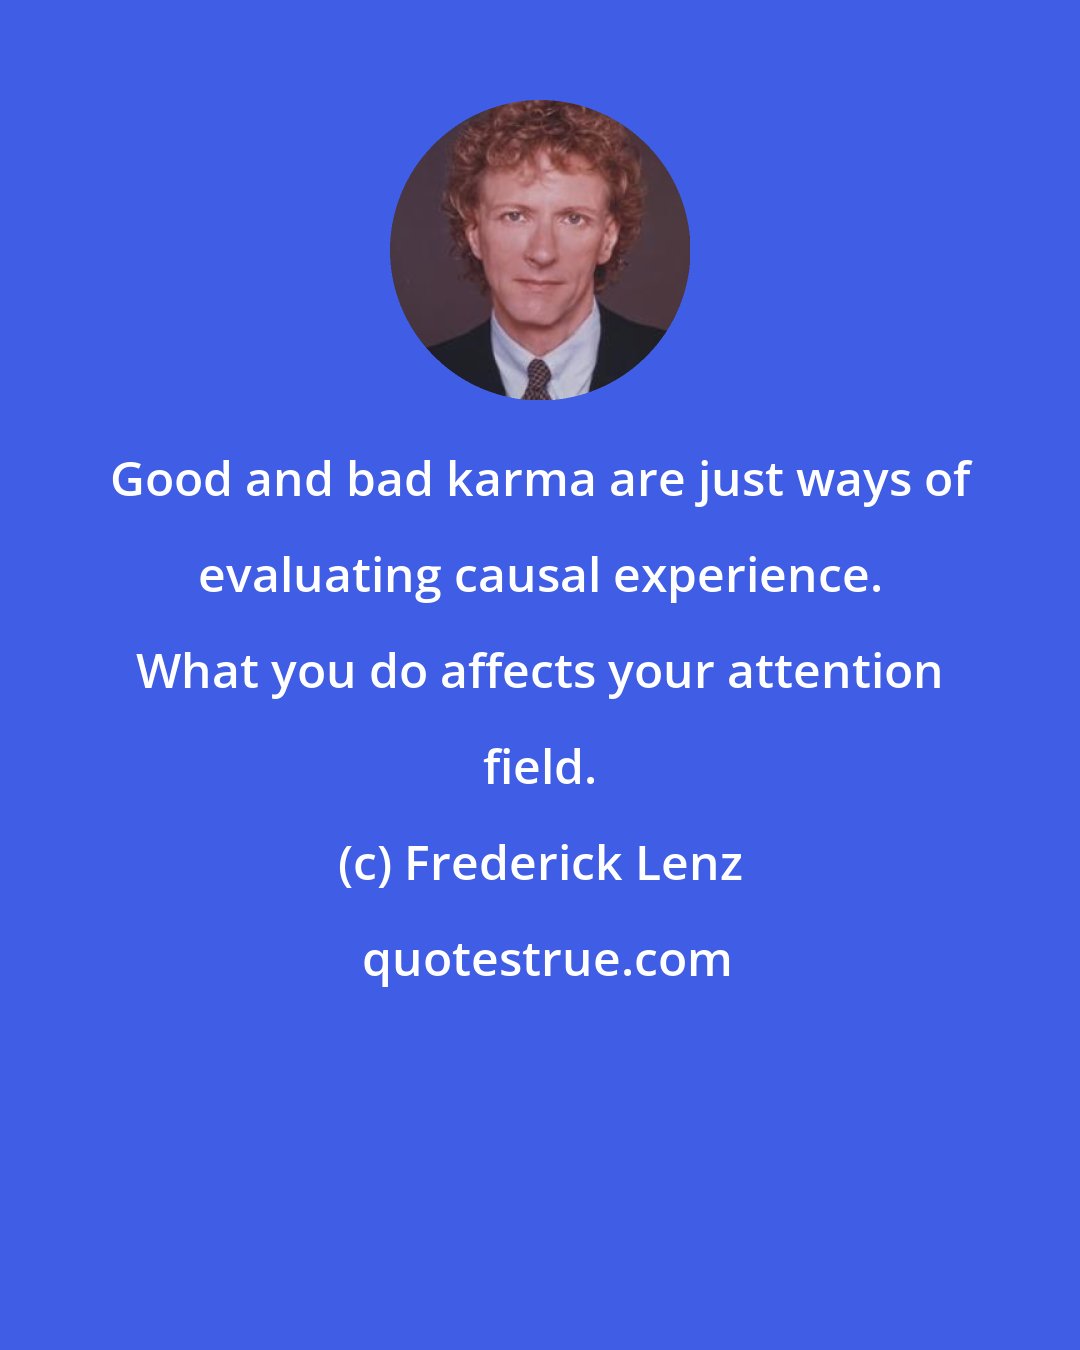 Frederick Lenz: Good and bad karma are just ways of evaluating causal experience. What you do affects your attention field.